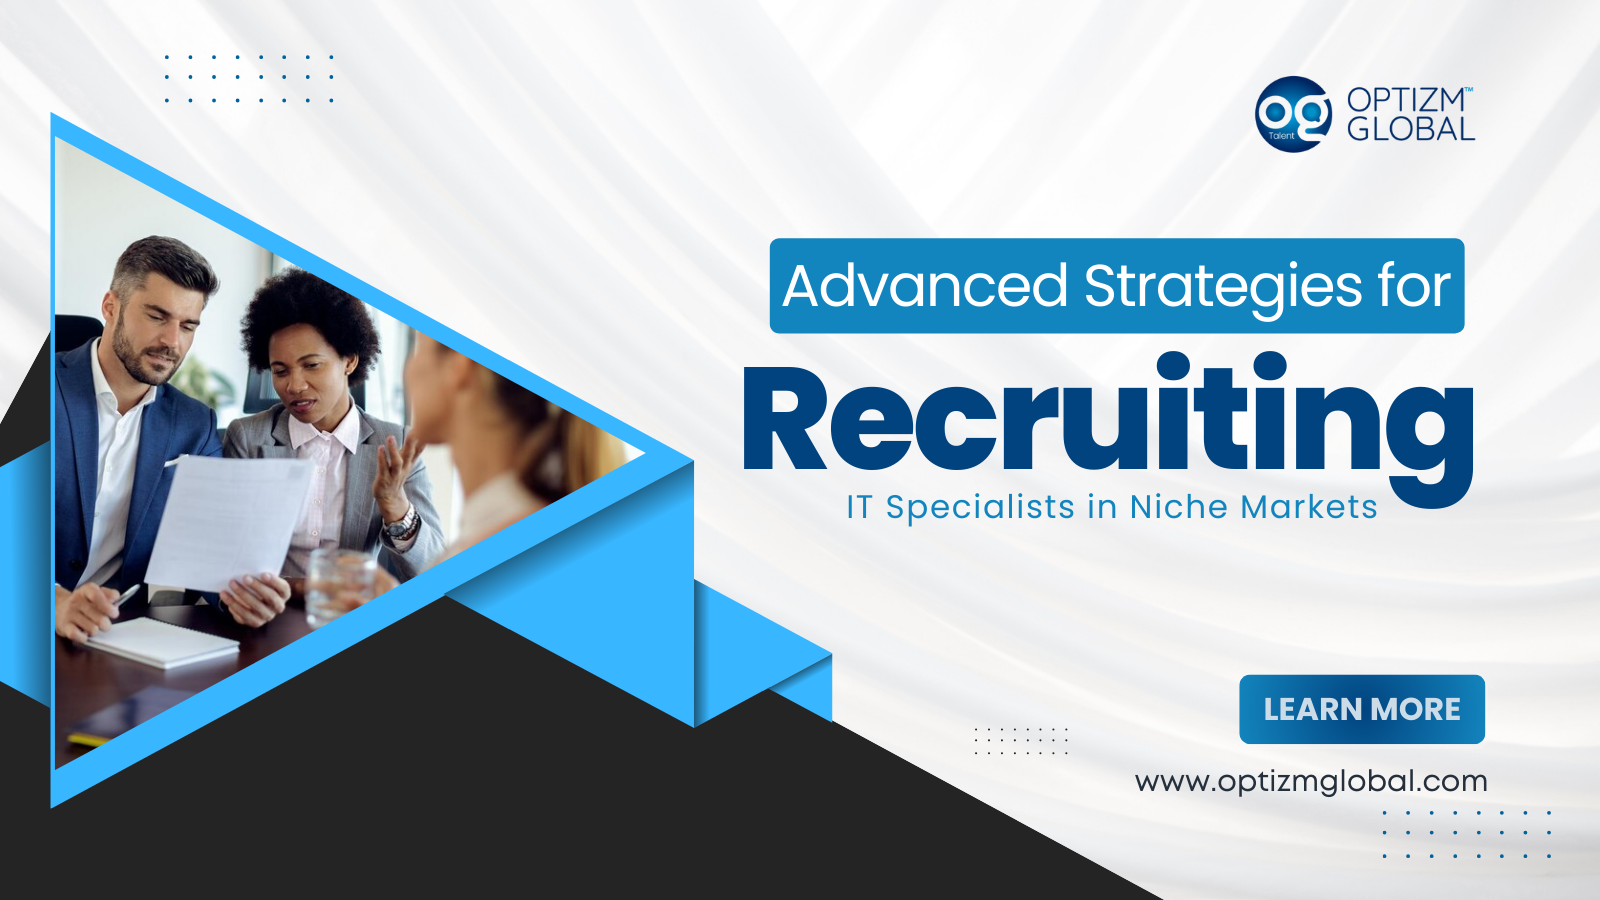 Advanced Strategies for Recruiting IT Specialists in Niche Markets